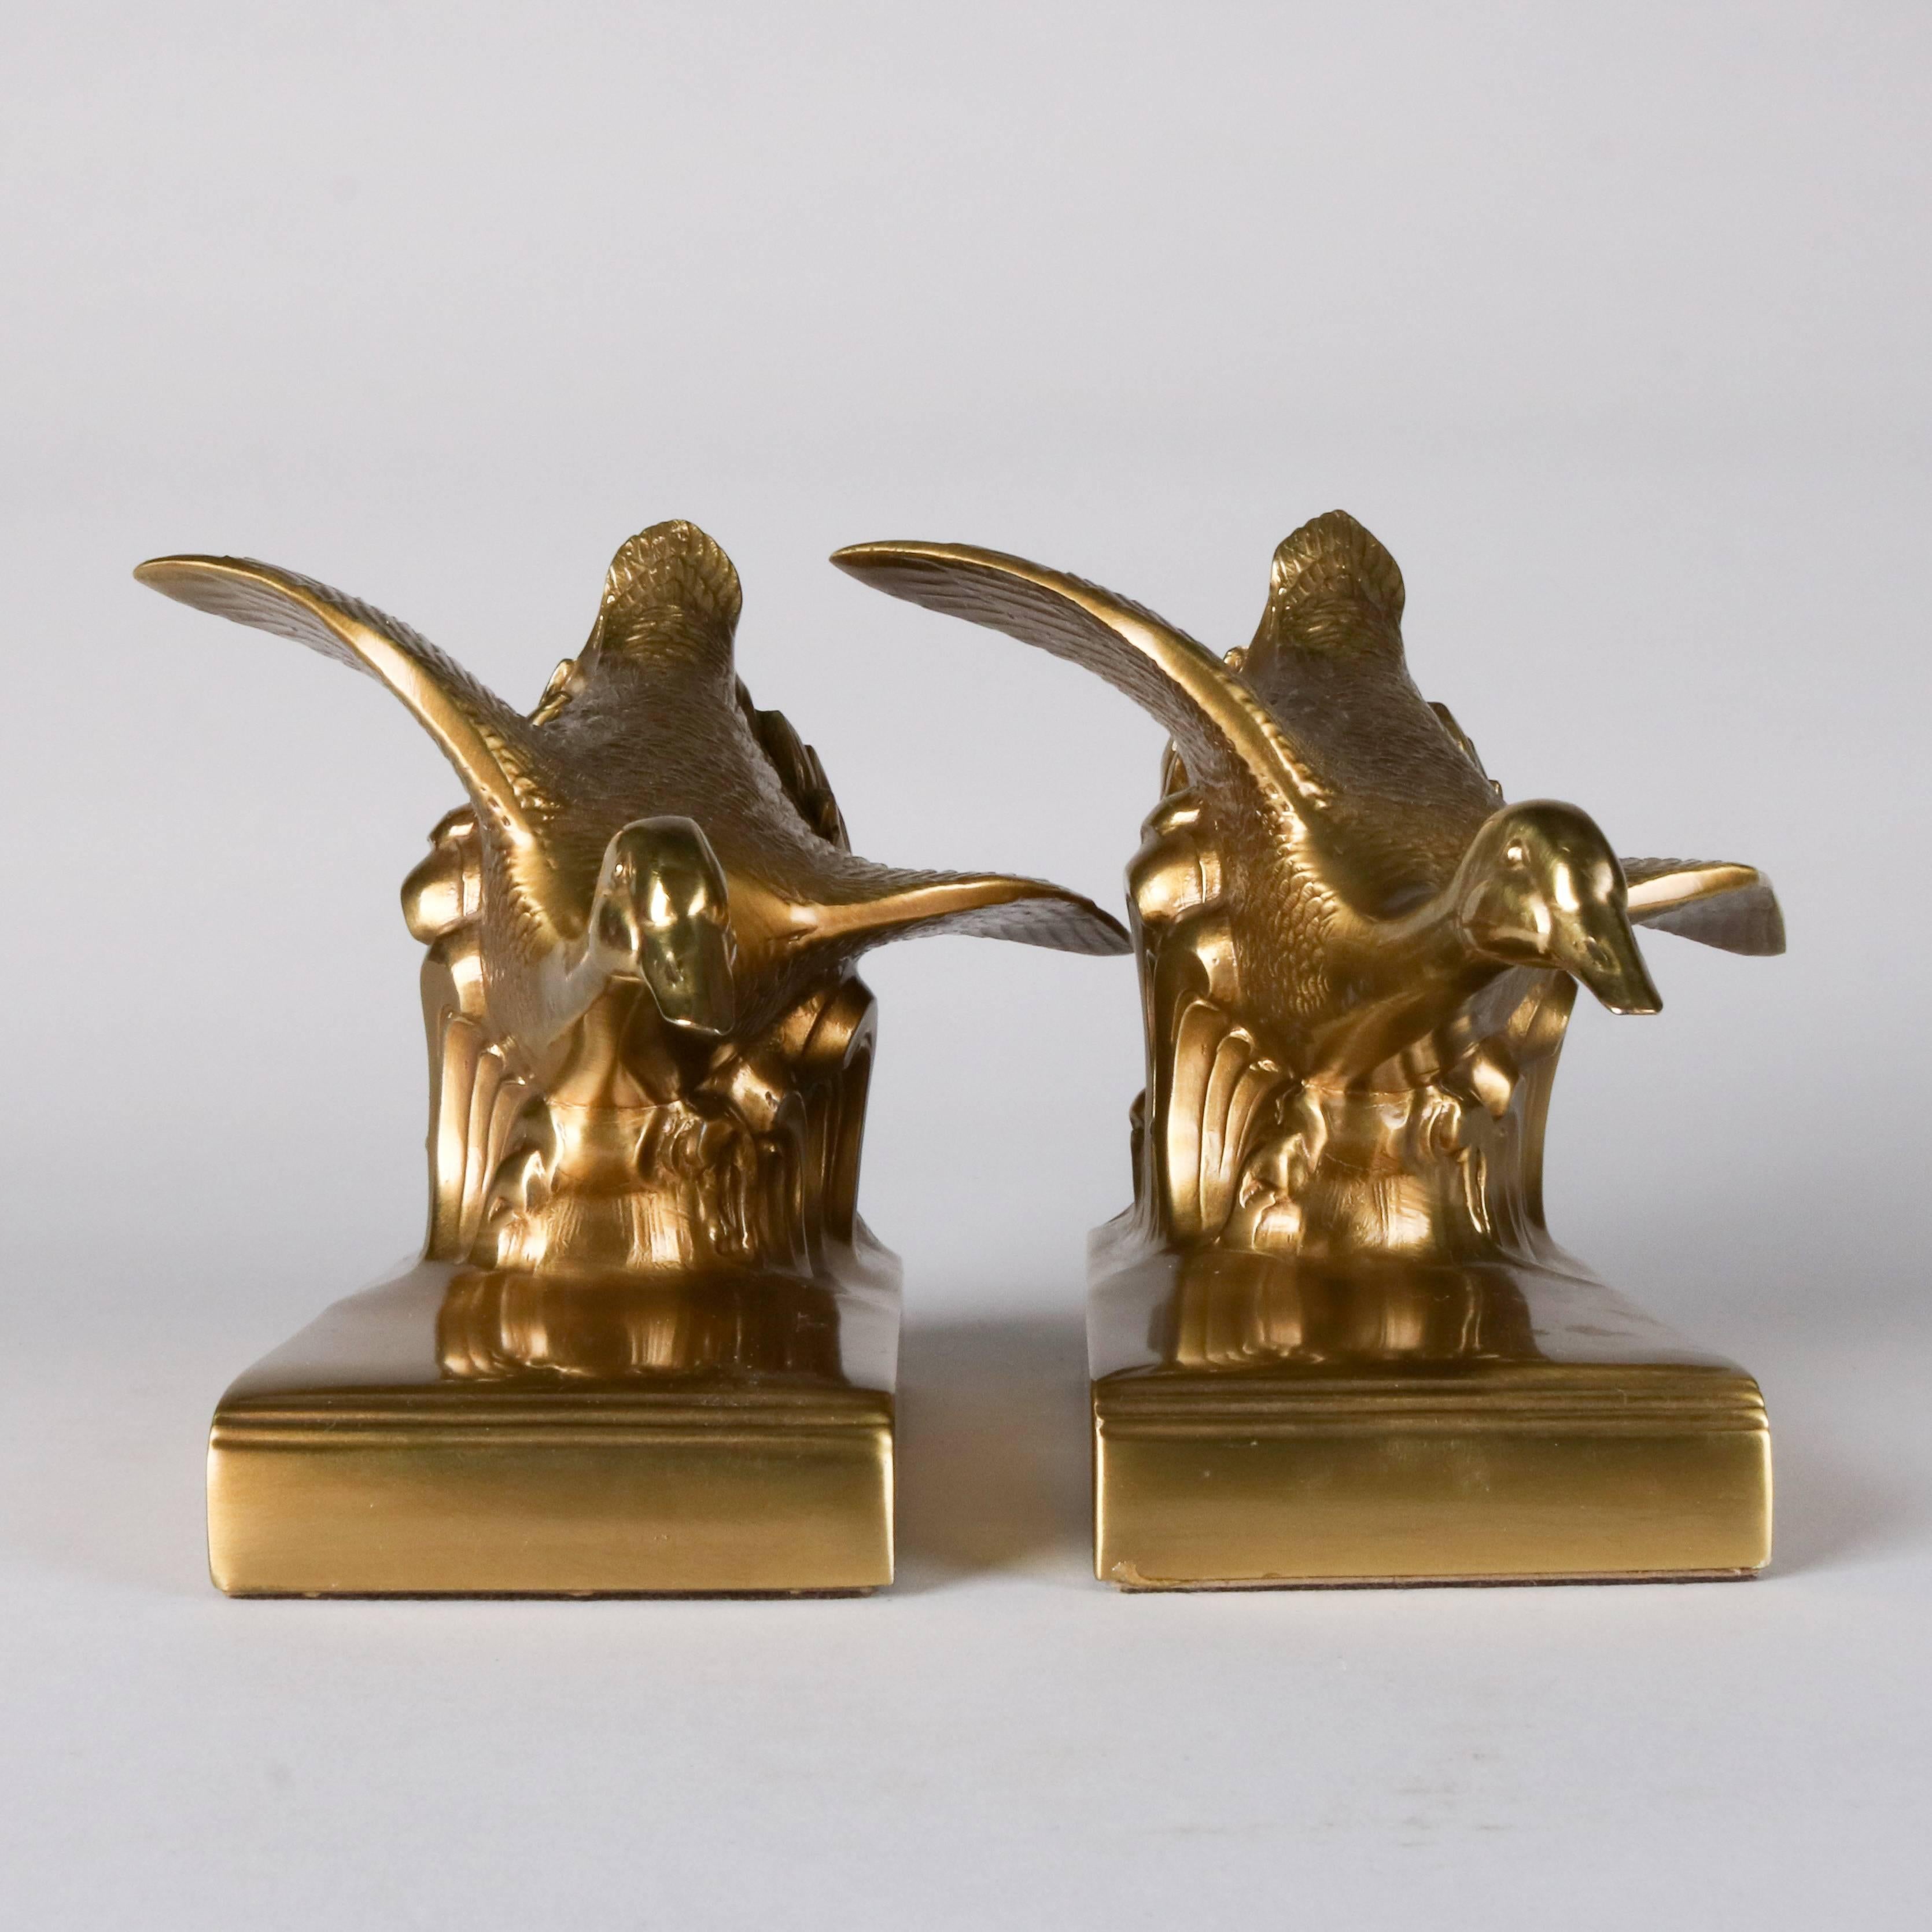 Pair of brass-plated flying geese bookends by Jennings Brothers signed "JB 879"

Measures: 2.25" H x 6.5" L x 6" W.